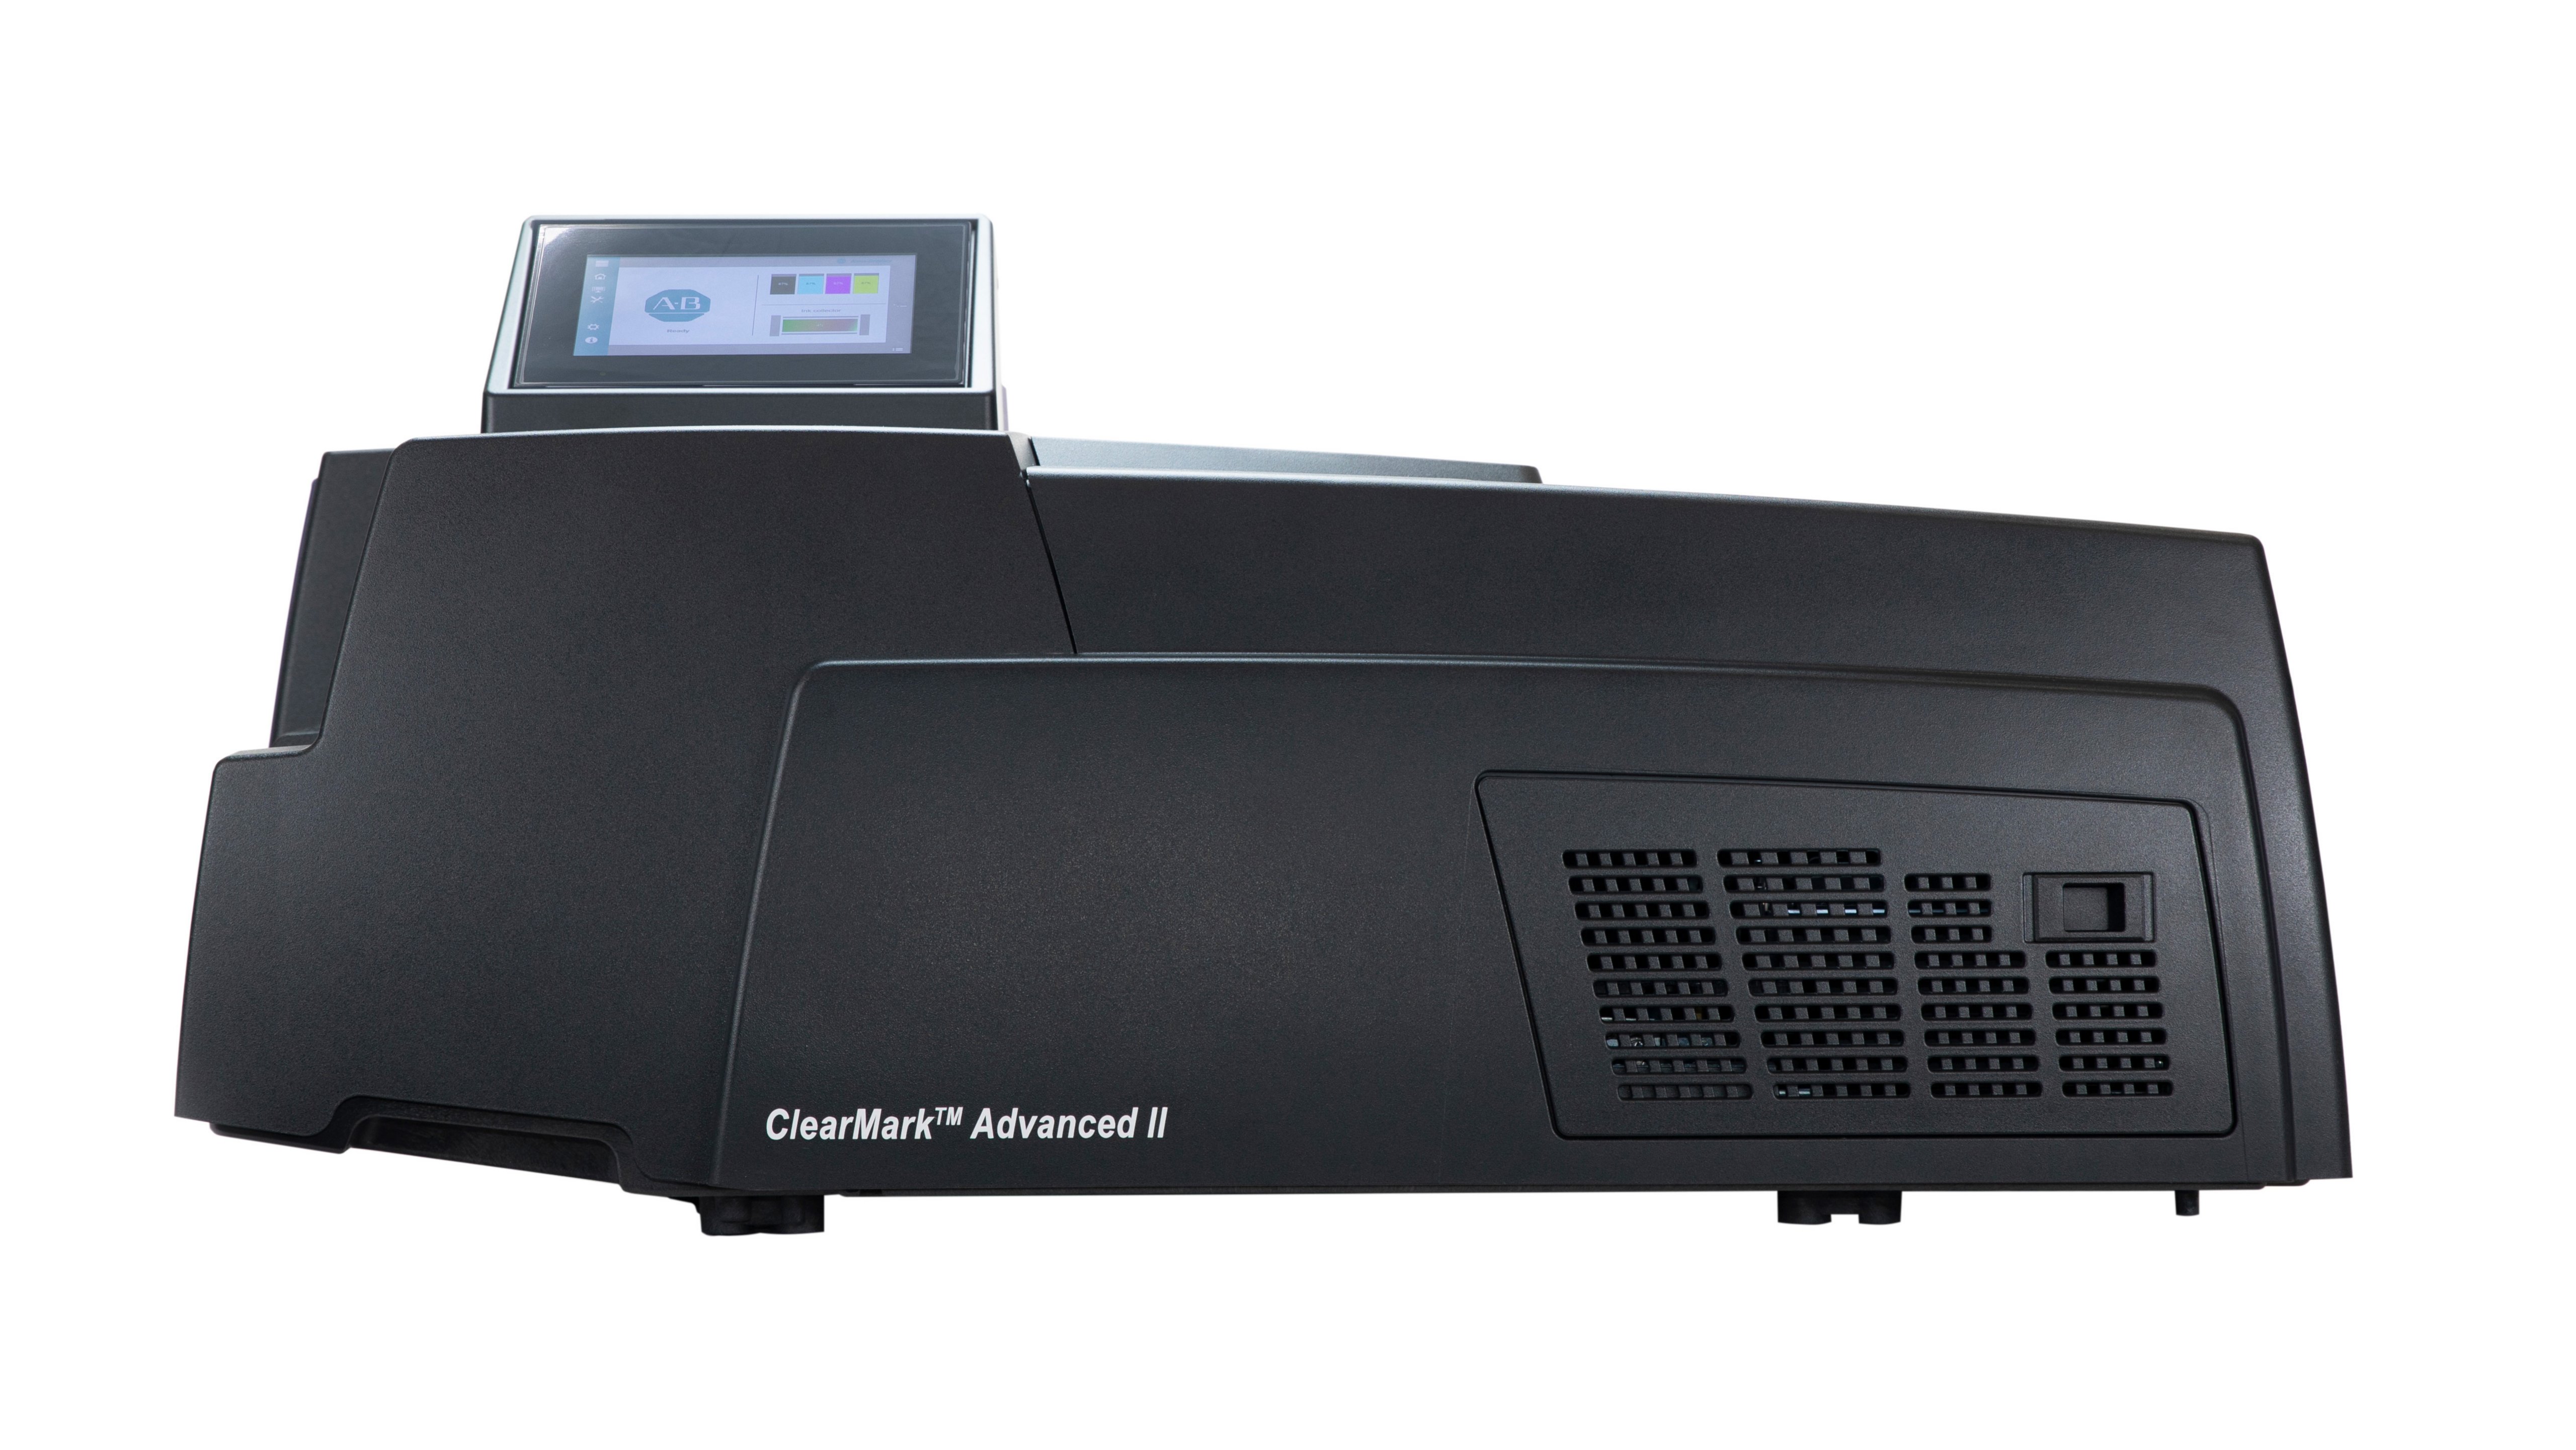 Black ClearMark Advanced II Marking Printer with rotating touch panel turned